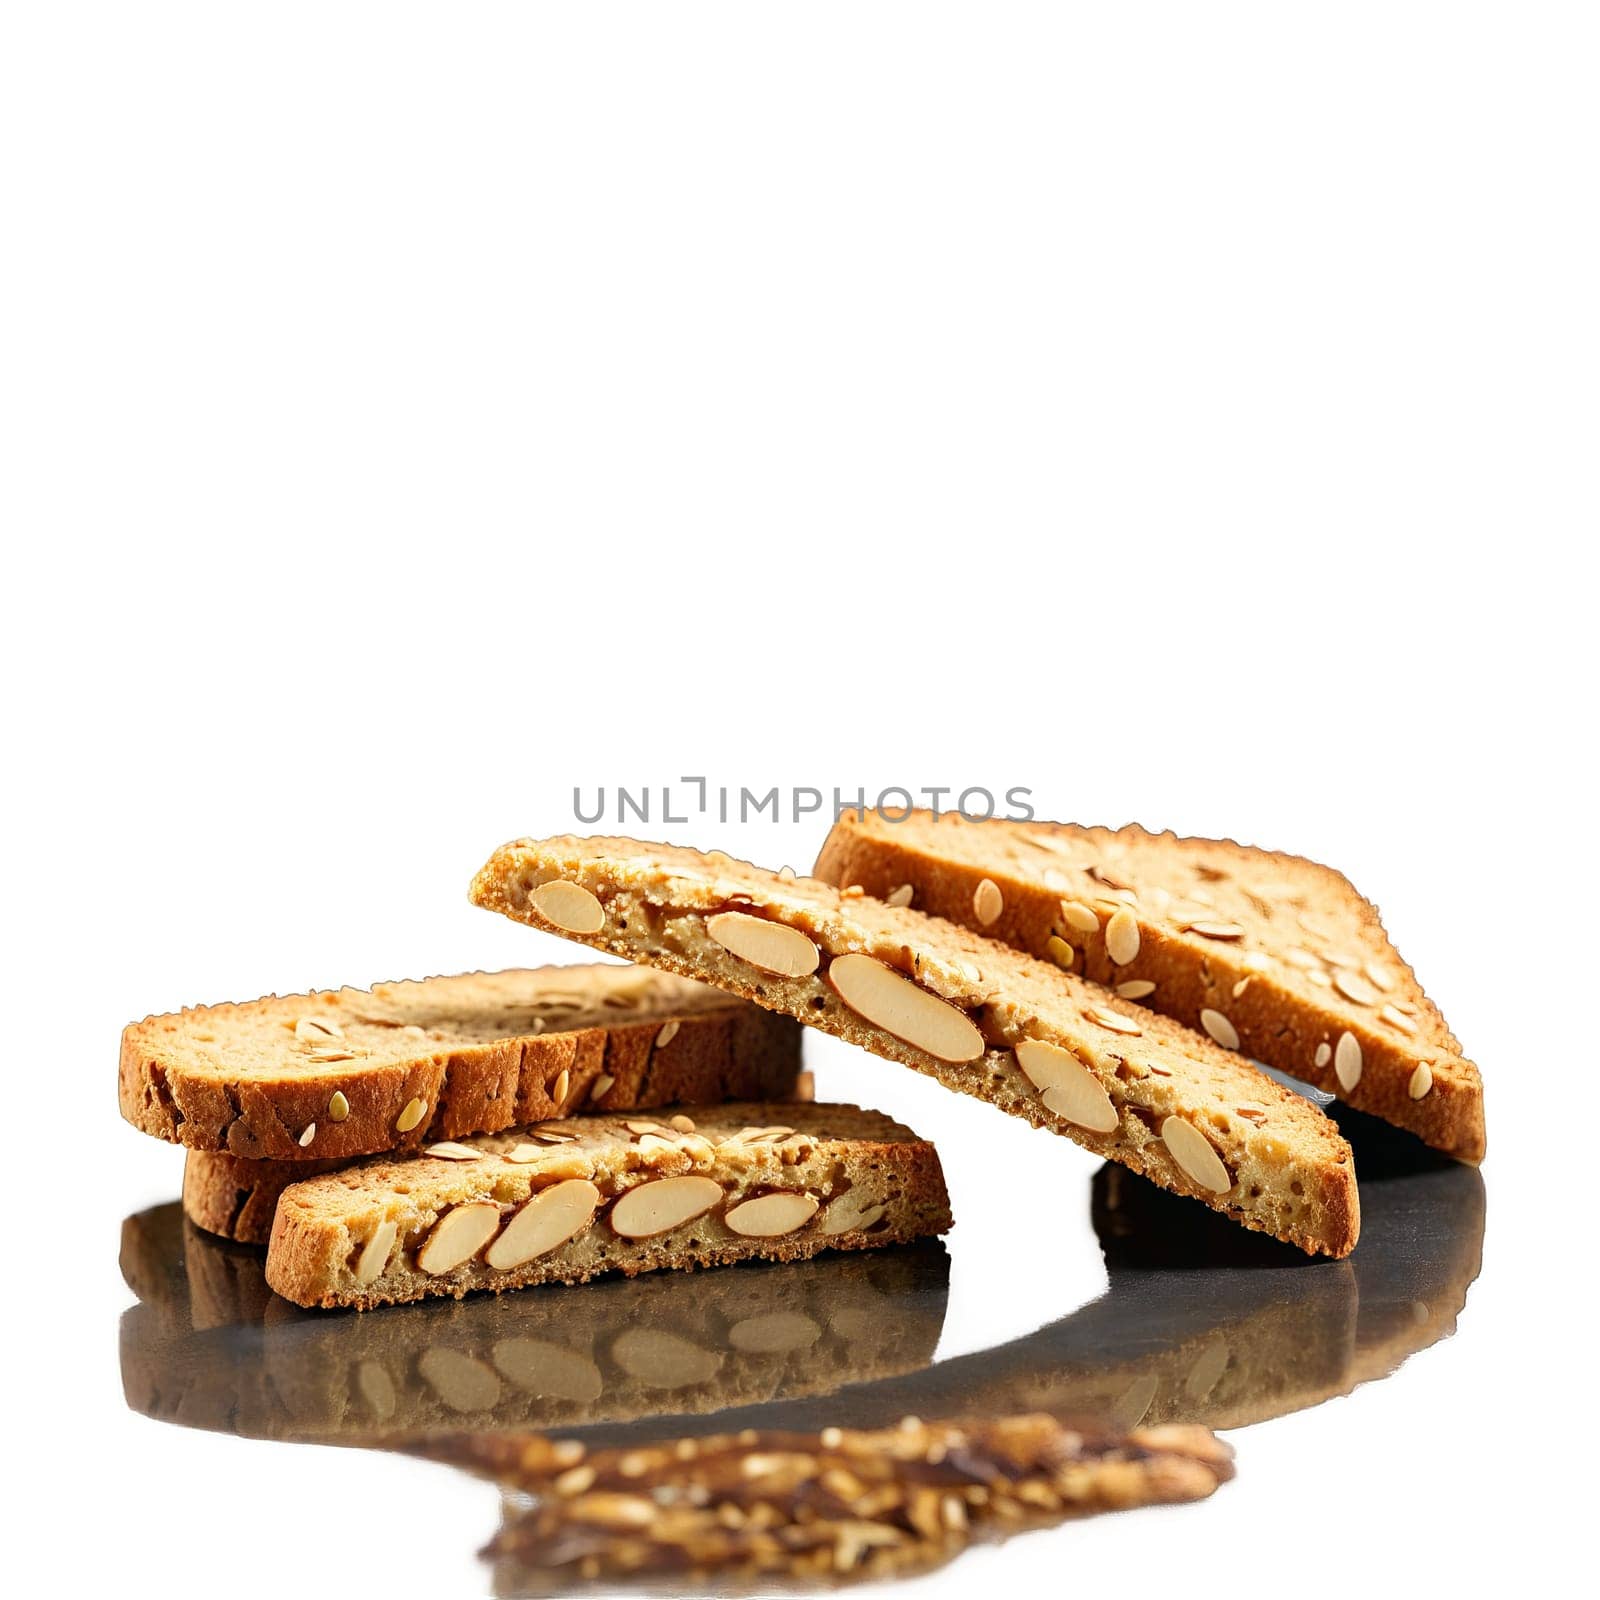 Biscotti with crisp texture almond slices twice baked oblong shape perfect for dunking Culinary by panophotograph